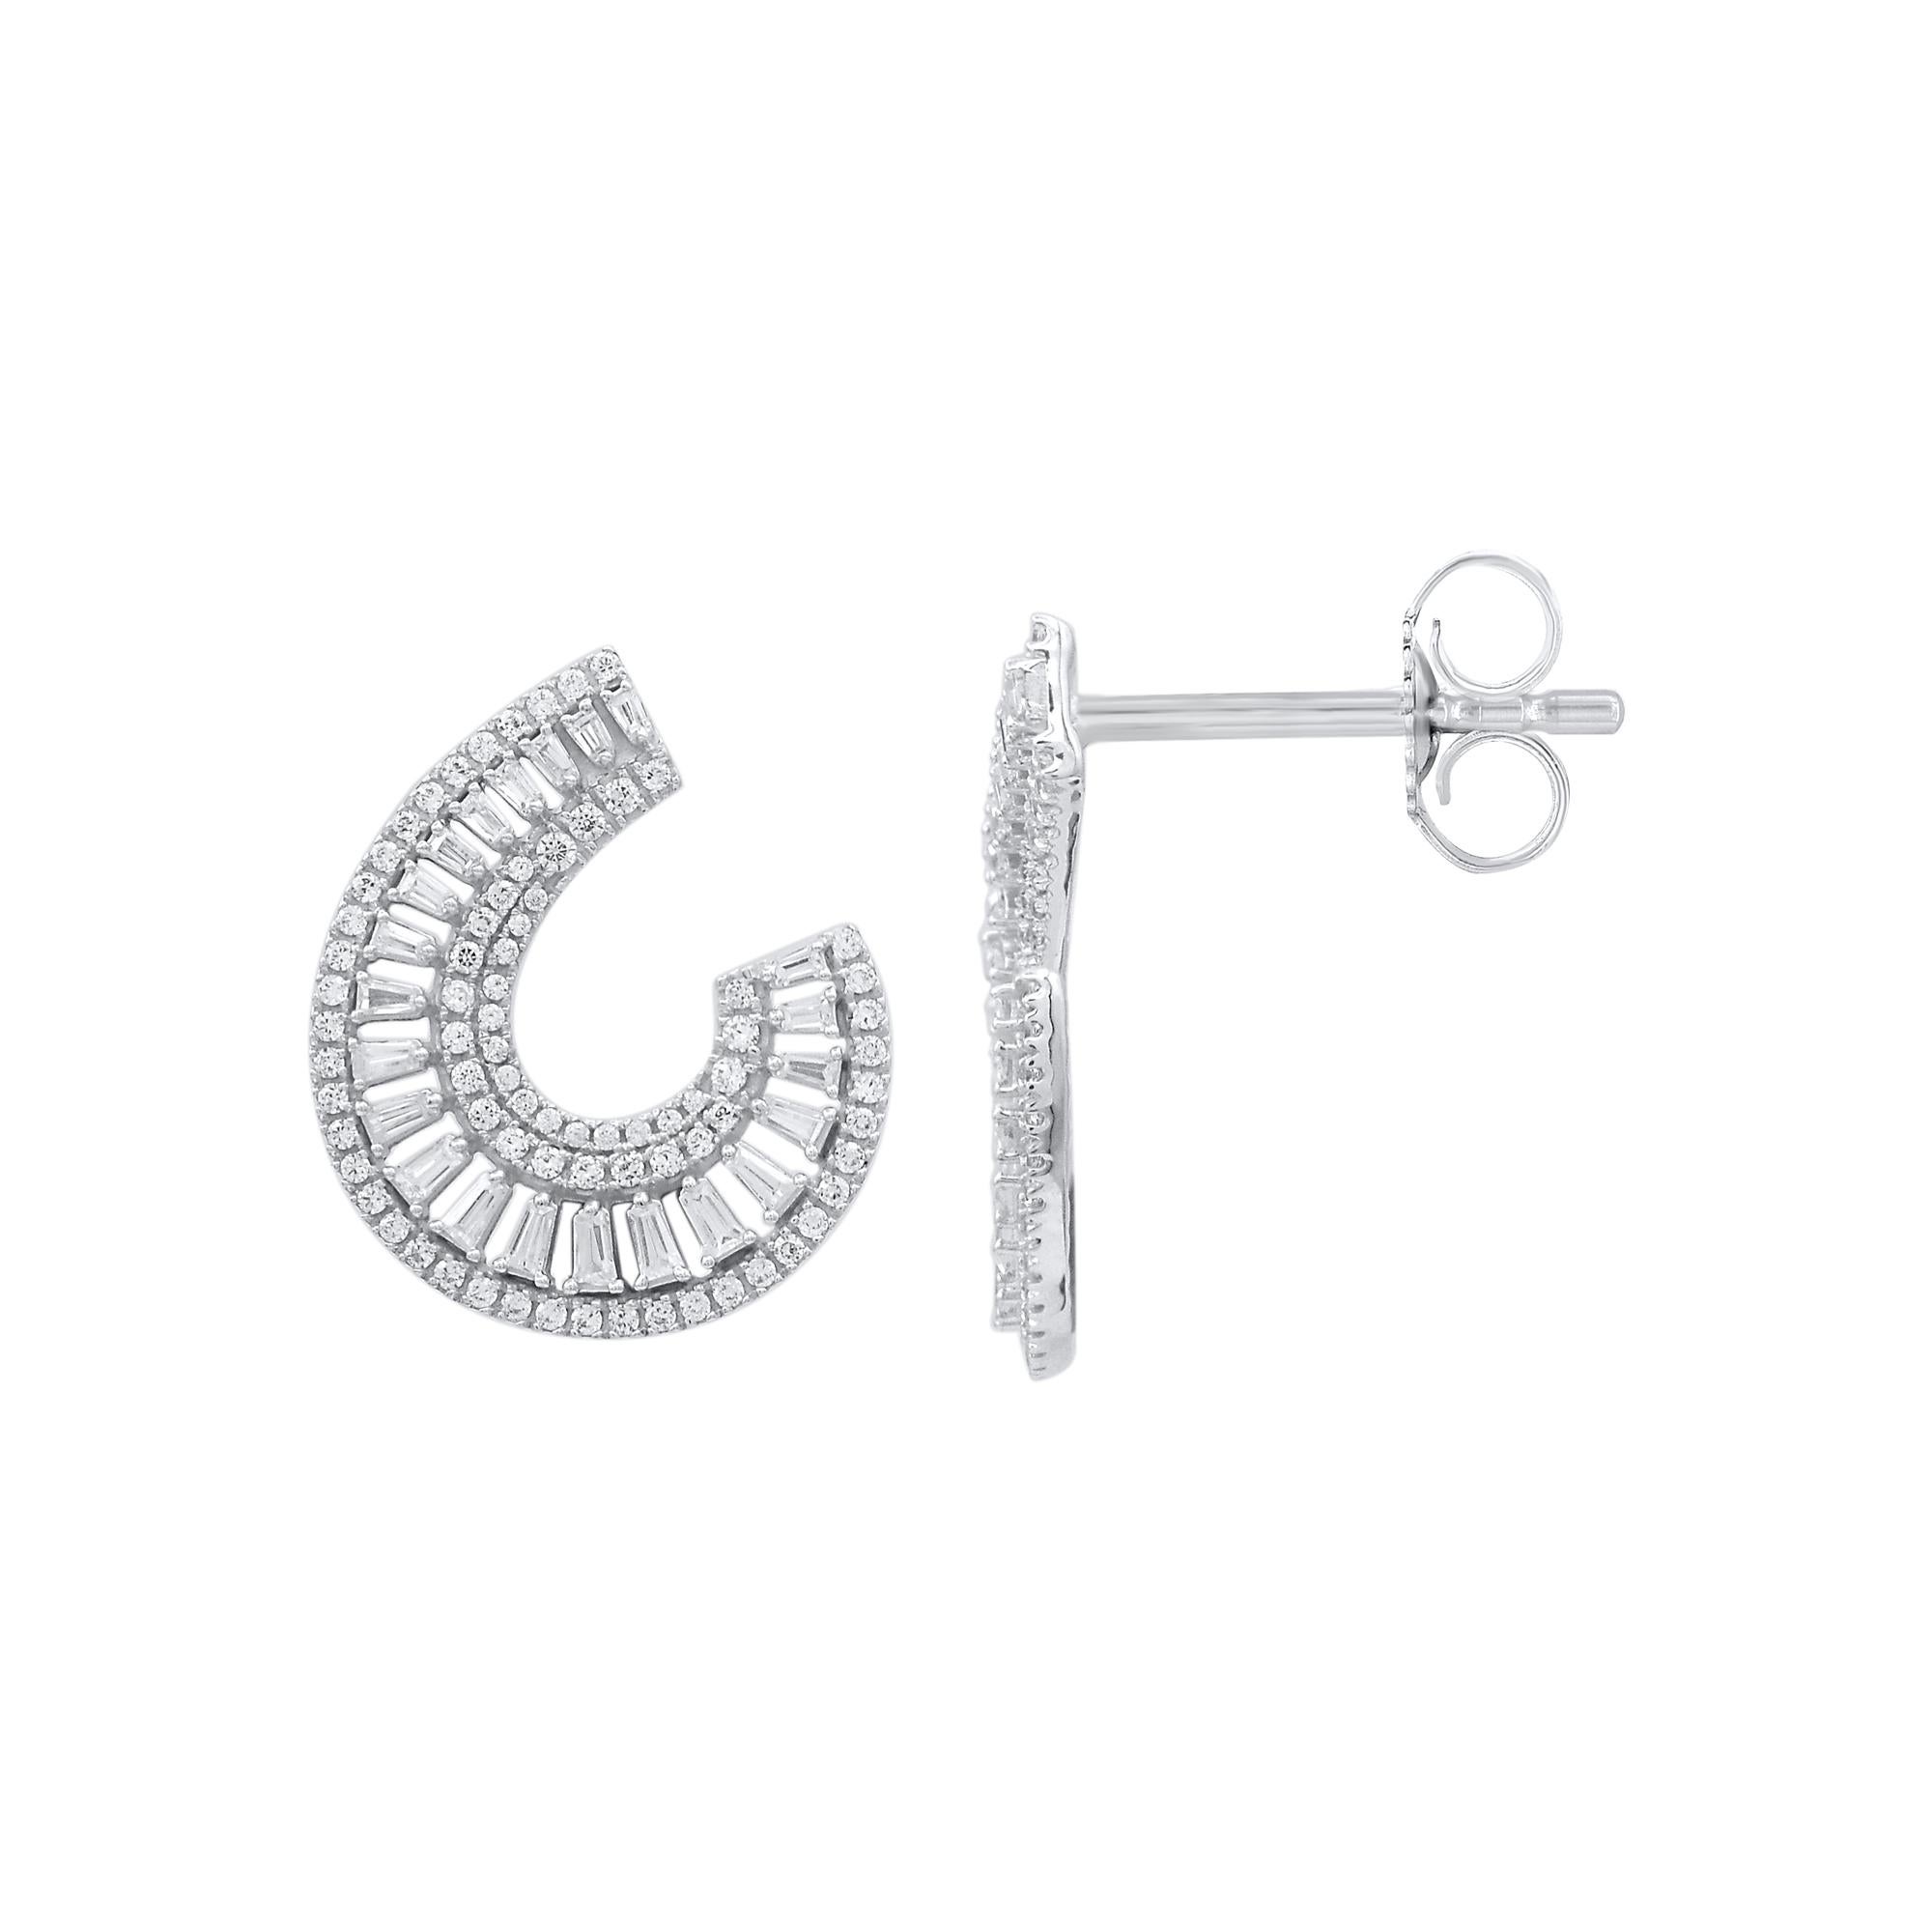 You'll adore the petite touch of shimmer these designer stud earrings add to your attire. Beautifully hand-crafted by our inhouse experts in 18 karat white gold and embellished with 198 single cut, brilliant cut round & baguette diamonds set in